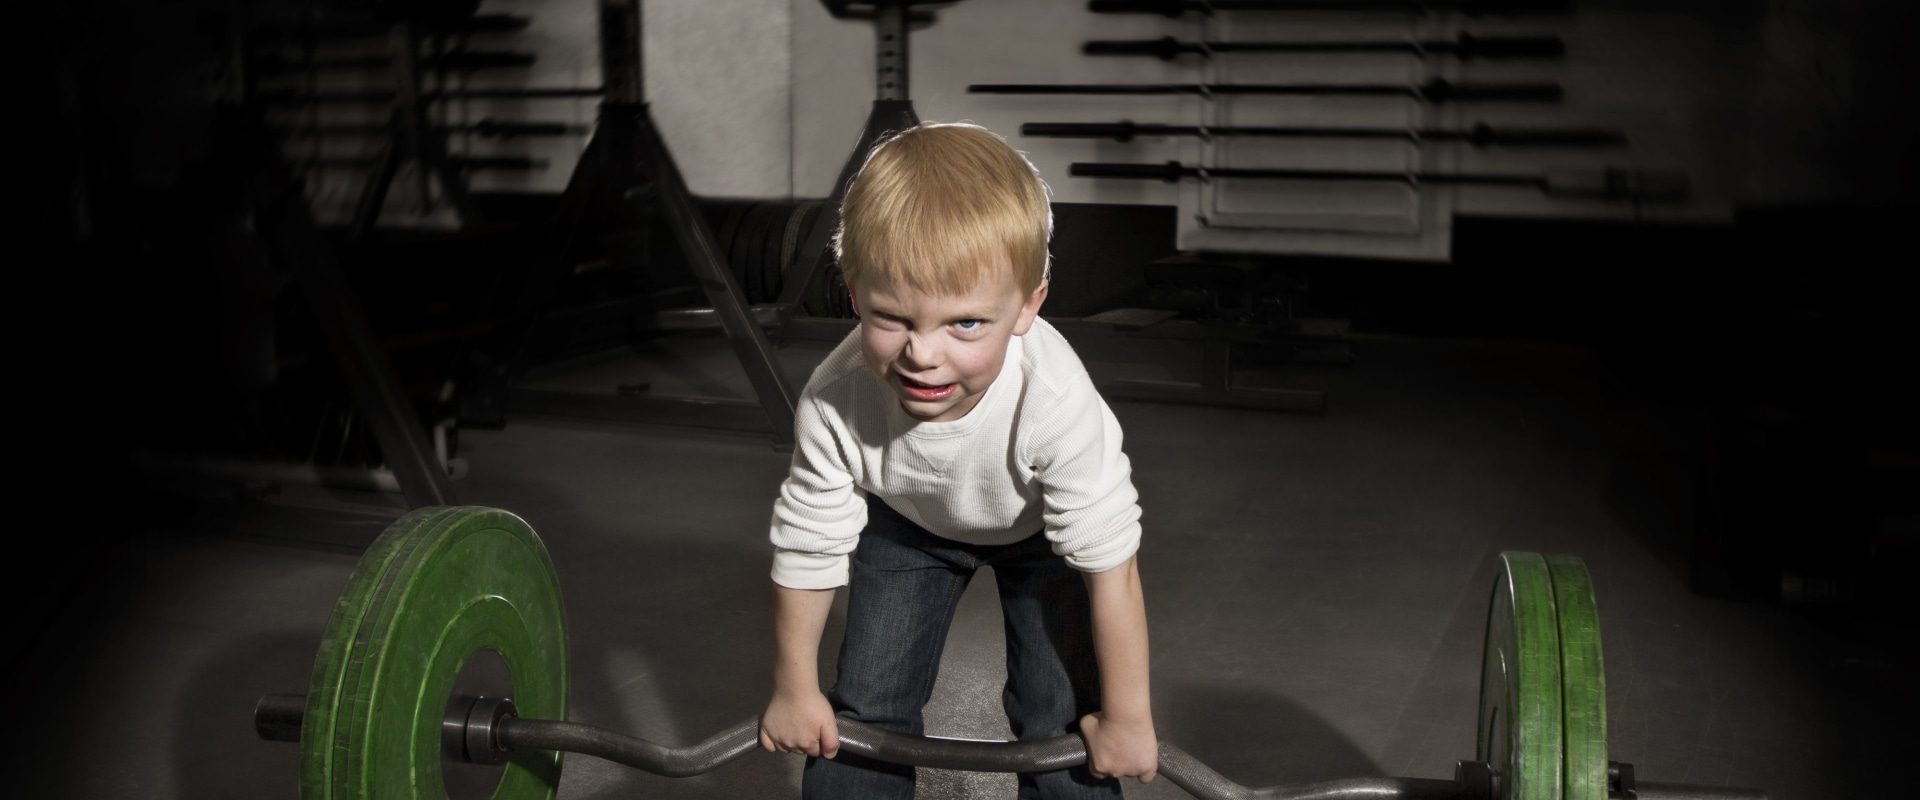 What is the greatest concern for youth who follow a resistance training program?